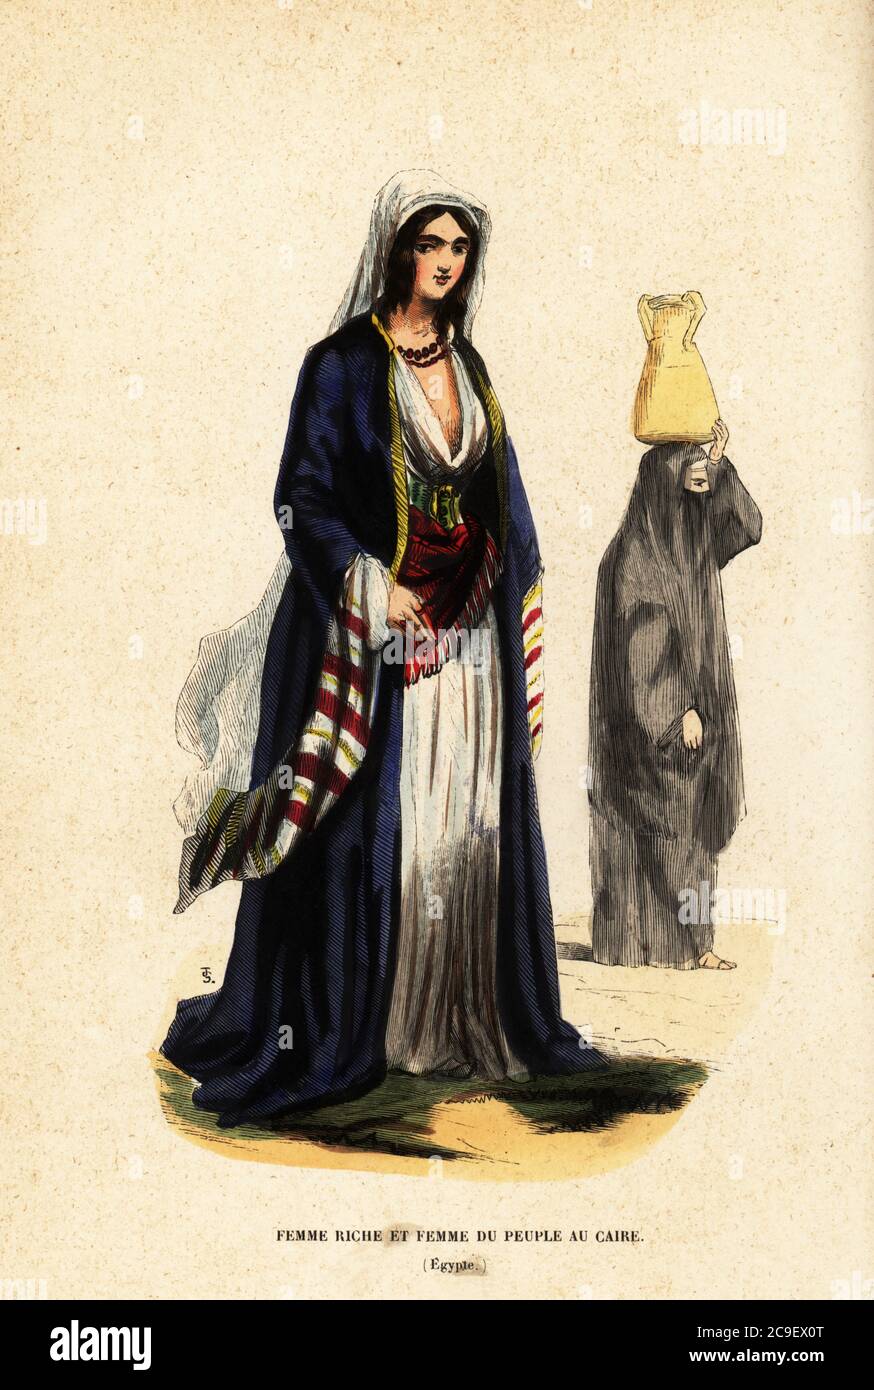 Rich woman and woman of the people, Cairo, Egypt, 19th century. The rich woman has her eyes decorated with khol, wears a wool cap, white chemise, long gold-trimmed yalek (robe) and cashmere or muslin scarf as a belt. The common woman wears a burka and carries an urn on her head. Femme riche et femme du peuple au Caire, Egypte. Handcoloured woodcut by T.S. from Auguste Wahlen's Moeurs, Usages et Costumes de tous les Peuples du Monde, (Manners, Customs and Costumes of all the People of the World) Librairie Historique-Artistique, Brussels, 1845. Stock Photo